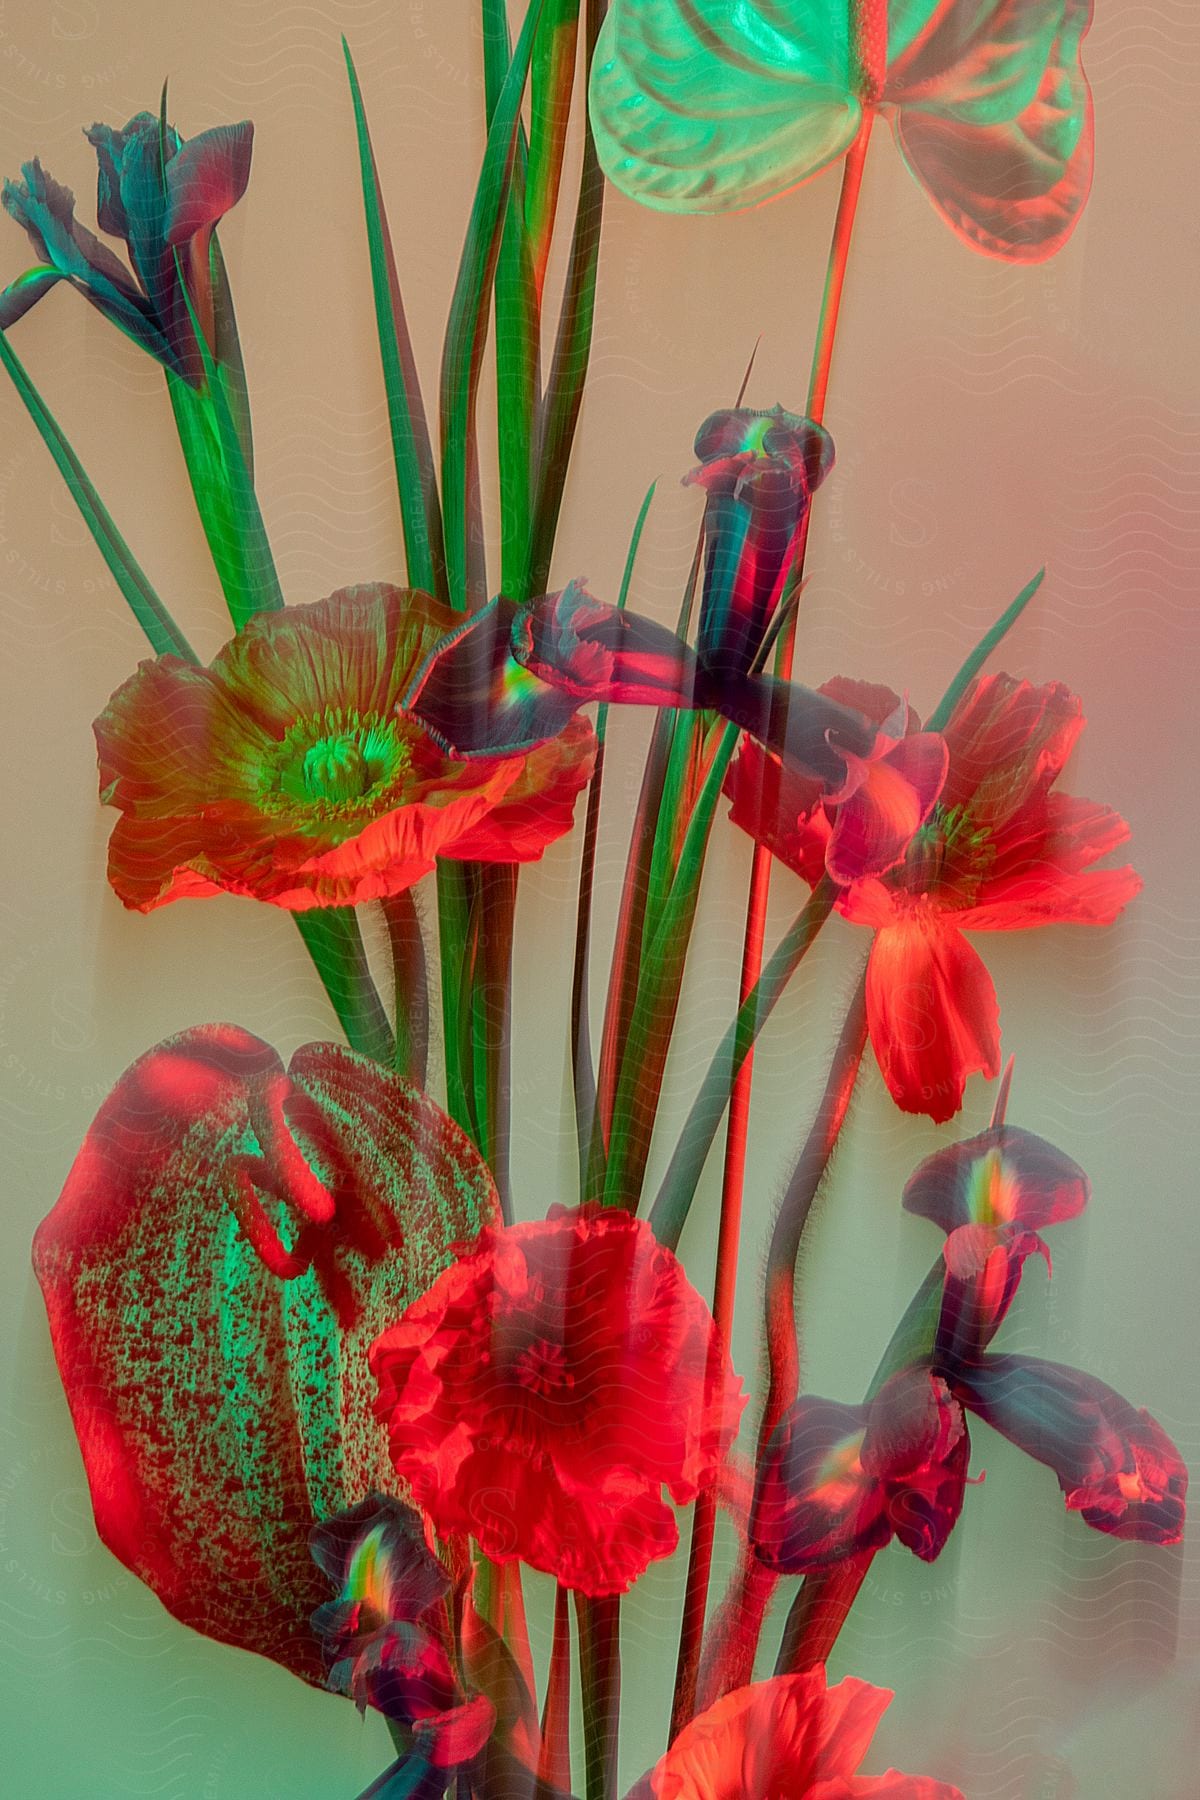 Close-up of flowers of different species with shades of vivid colors on a blurred background